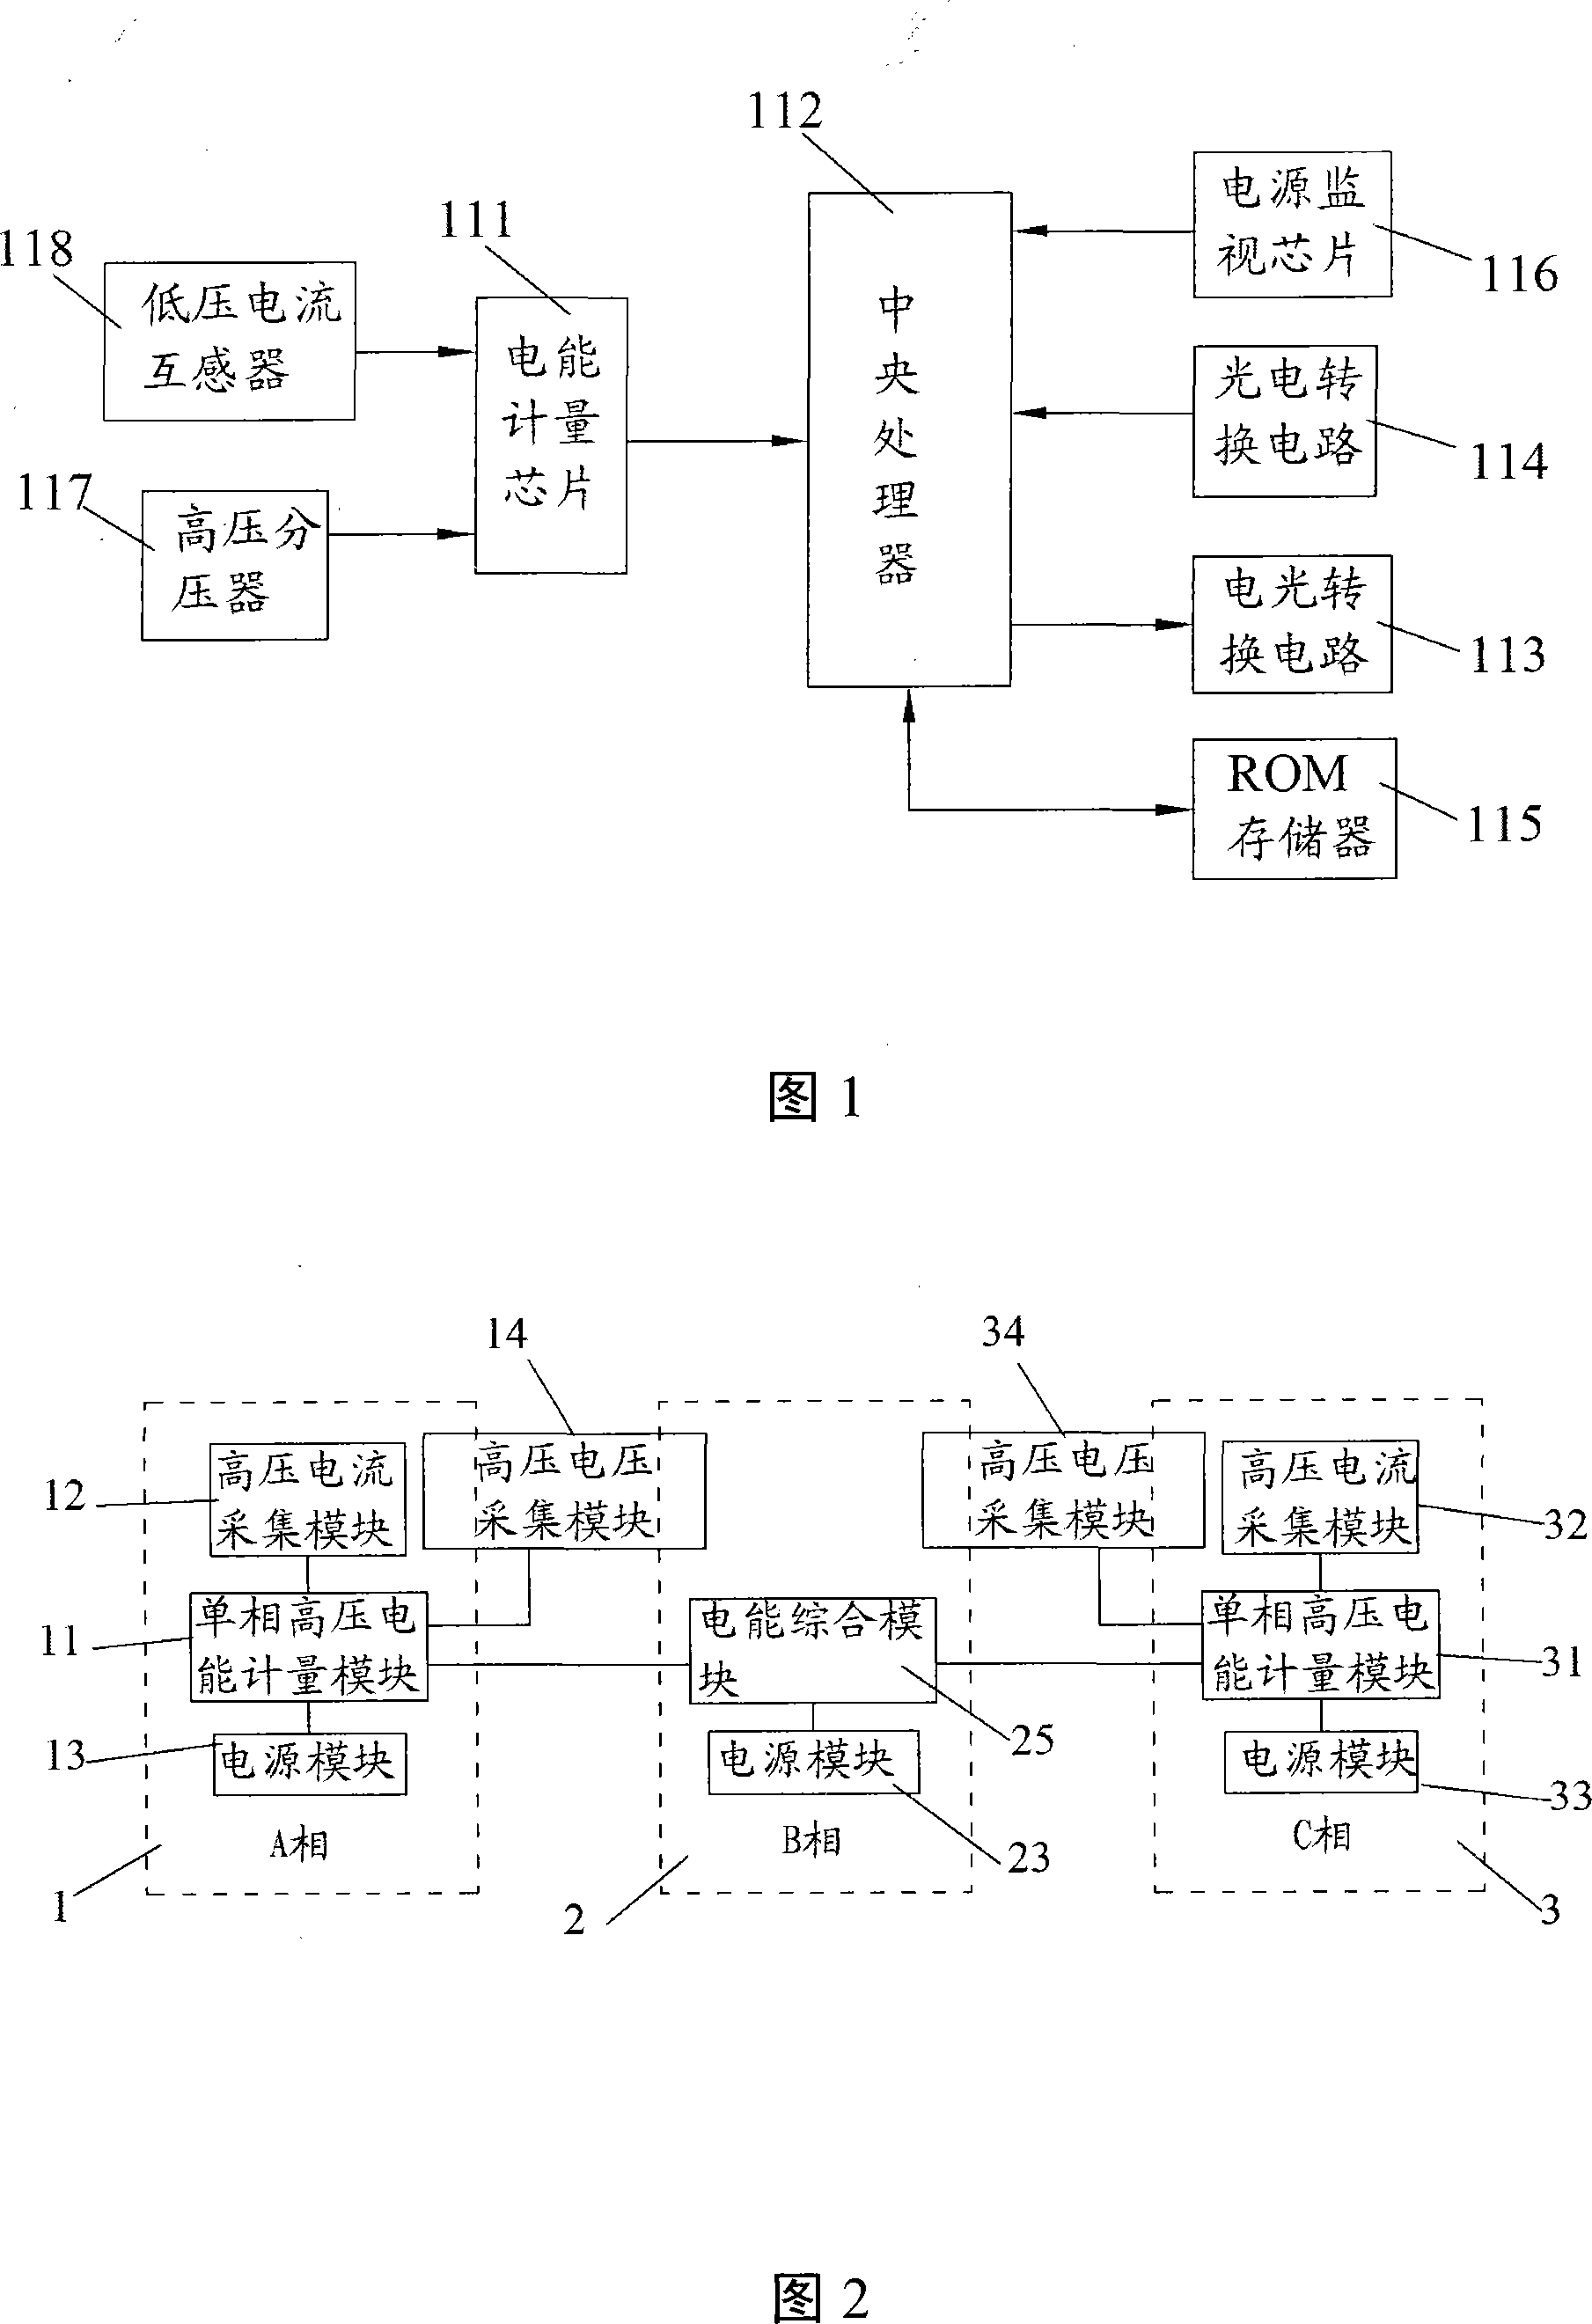 High voltage electric energy direct metered system and method